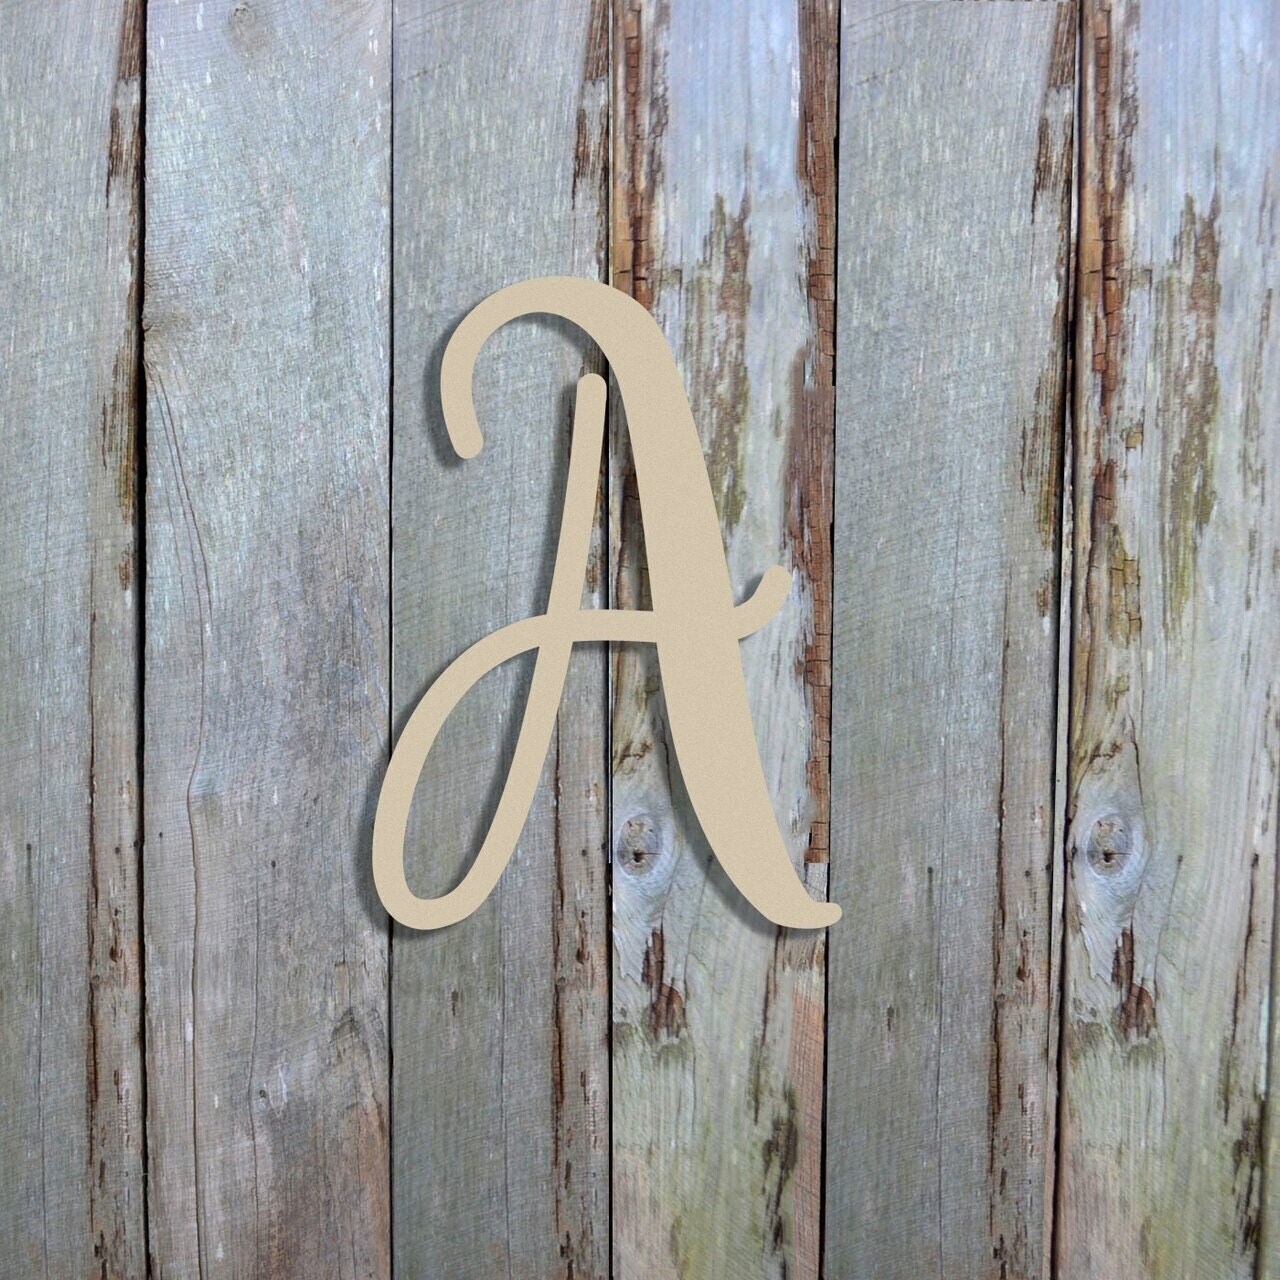 White Wood Letters 6 Inch, Wood Letters for DIY Party Projects (Z)